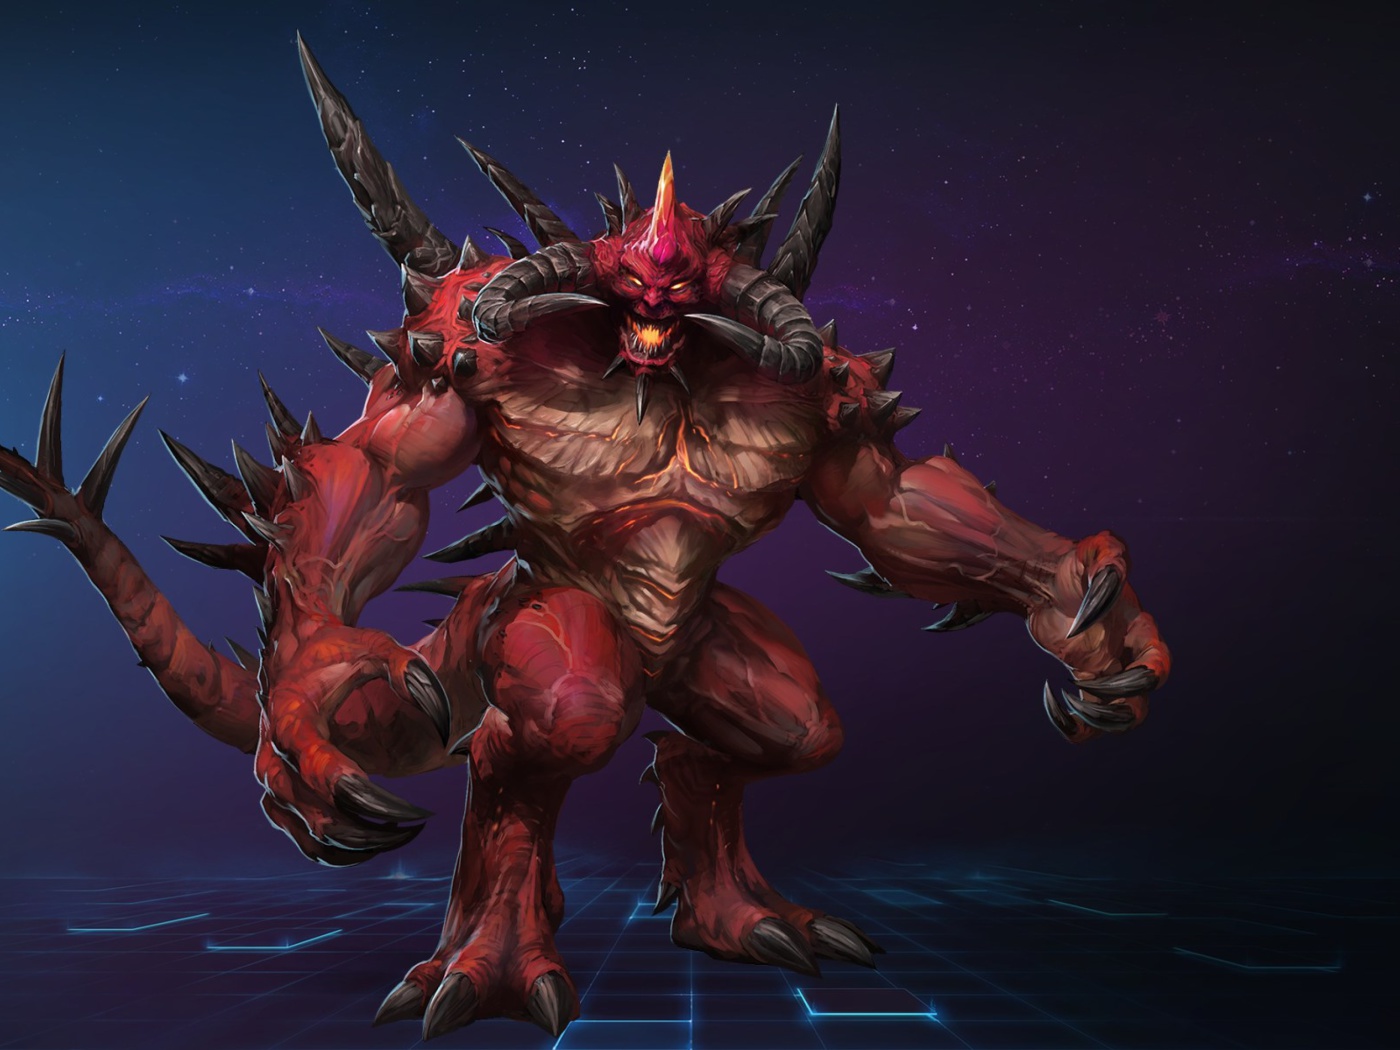 Heroes of the Storm Battle Video Game screenshot #1 1400x1050